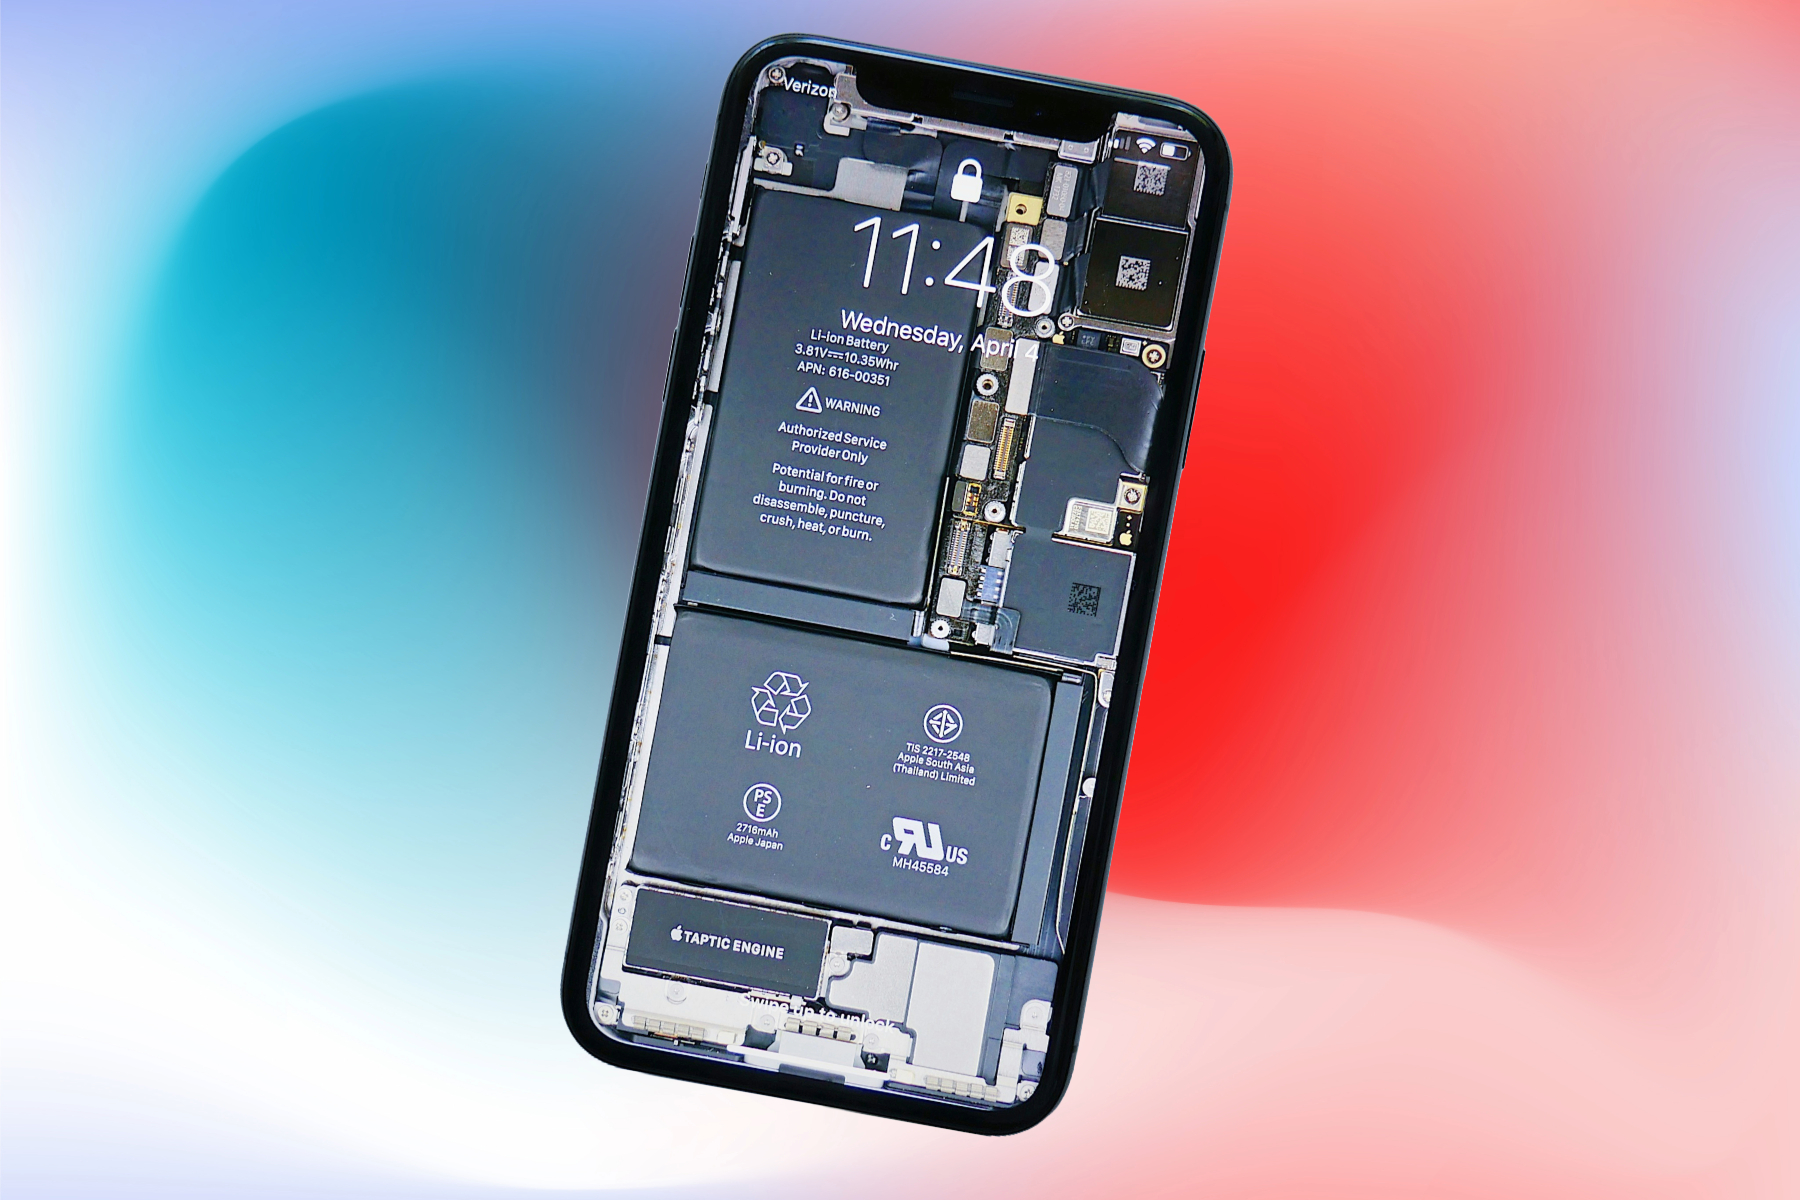 Insides of an iPhone depicted as a wallpaper.